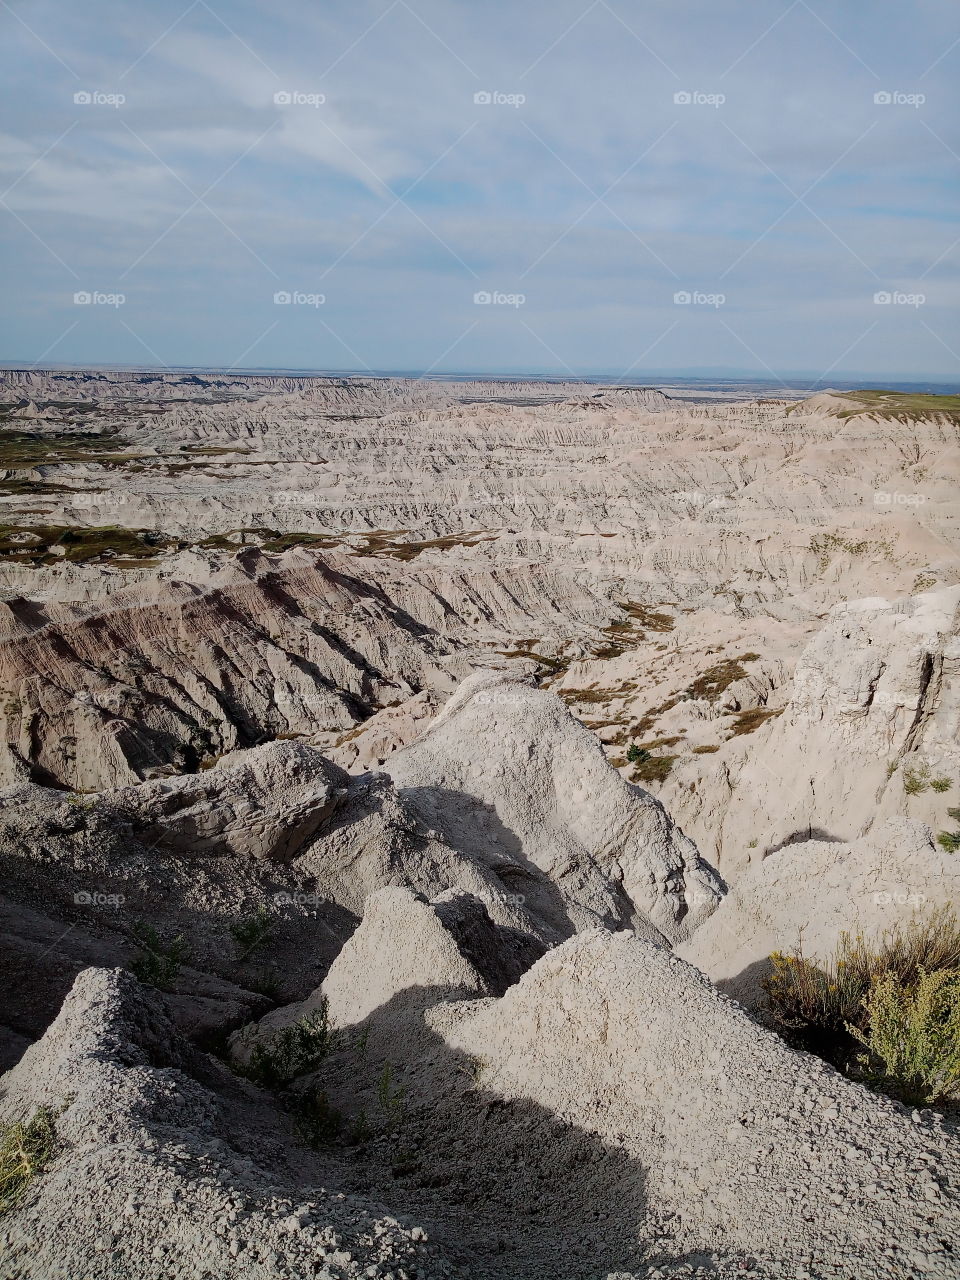 View of the Badlands National Park